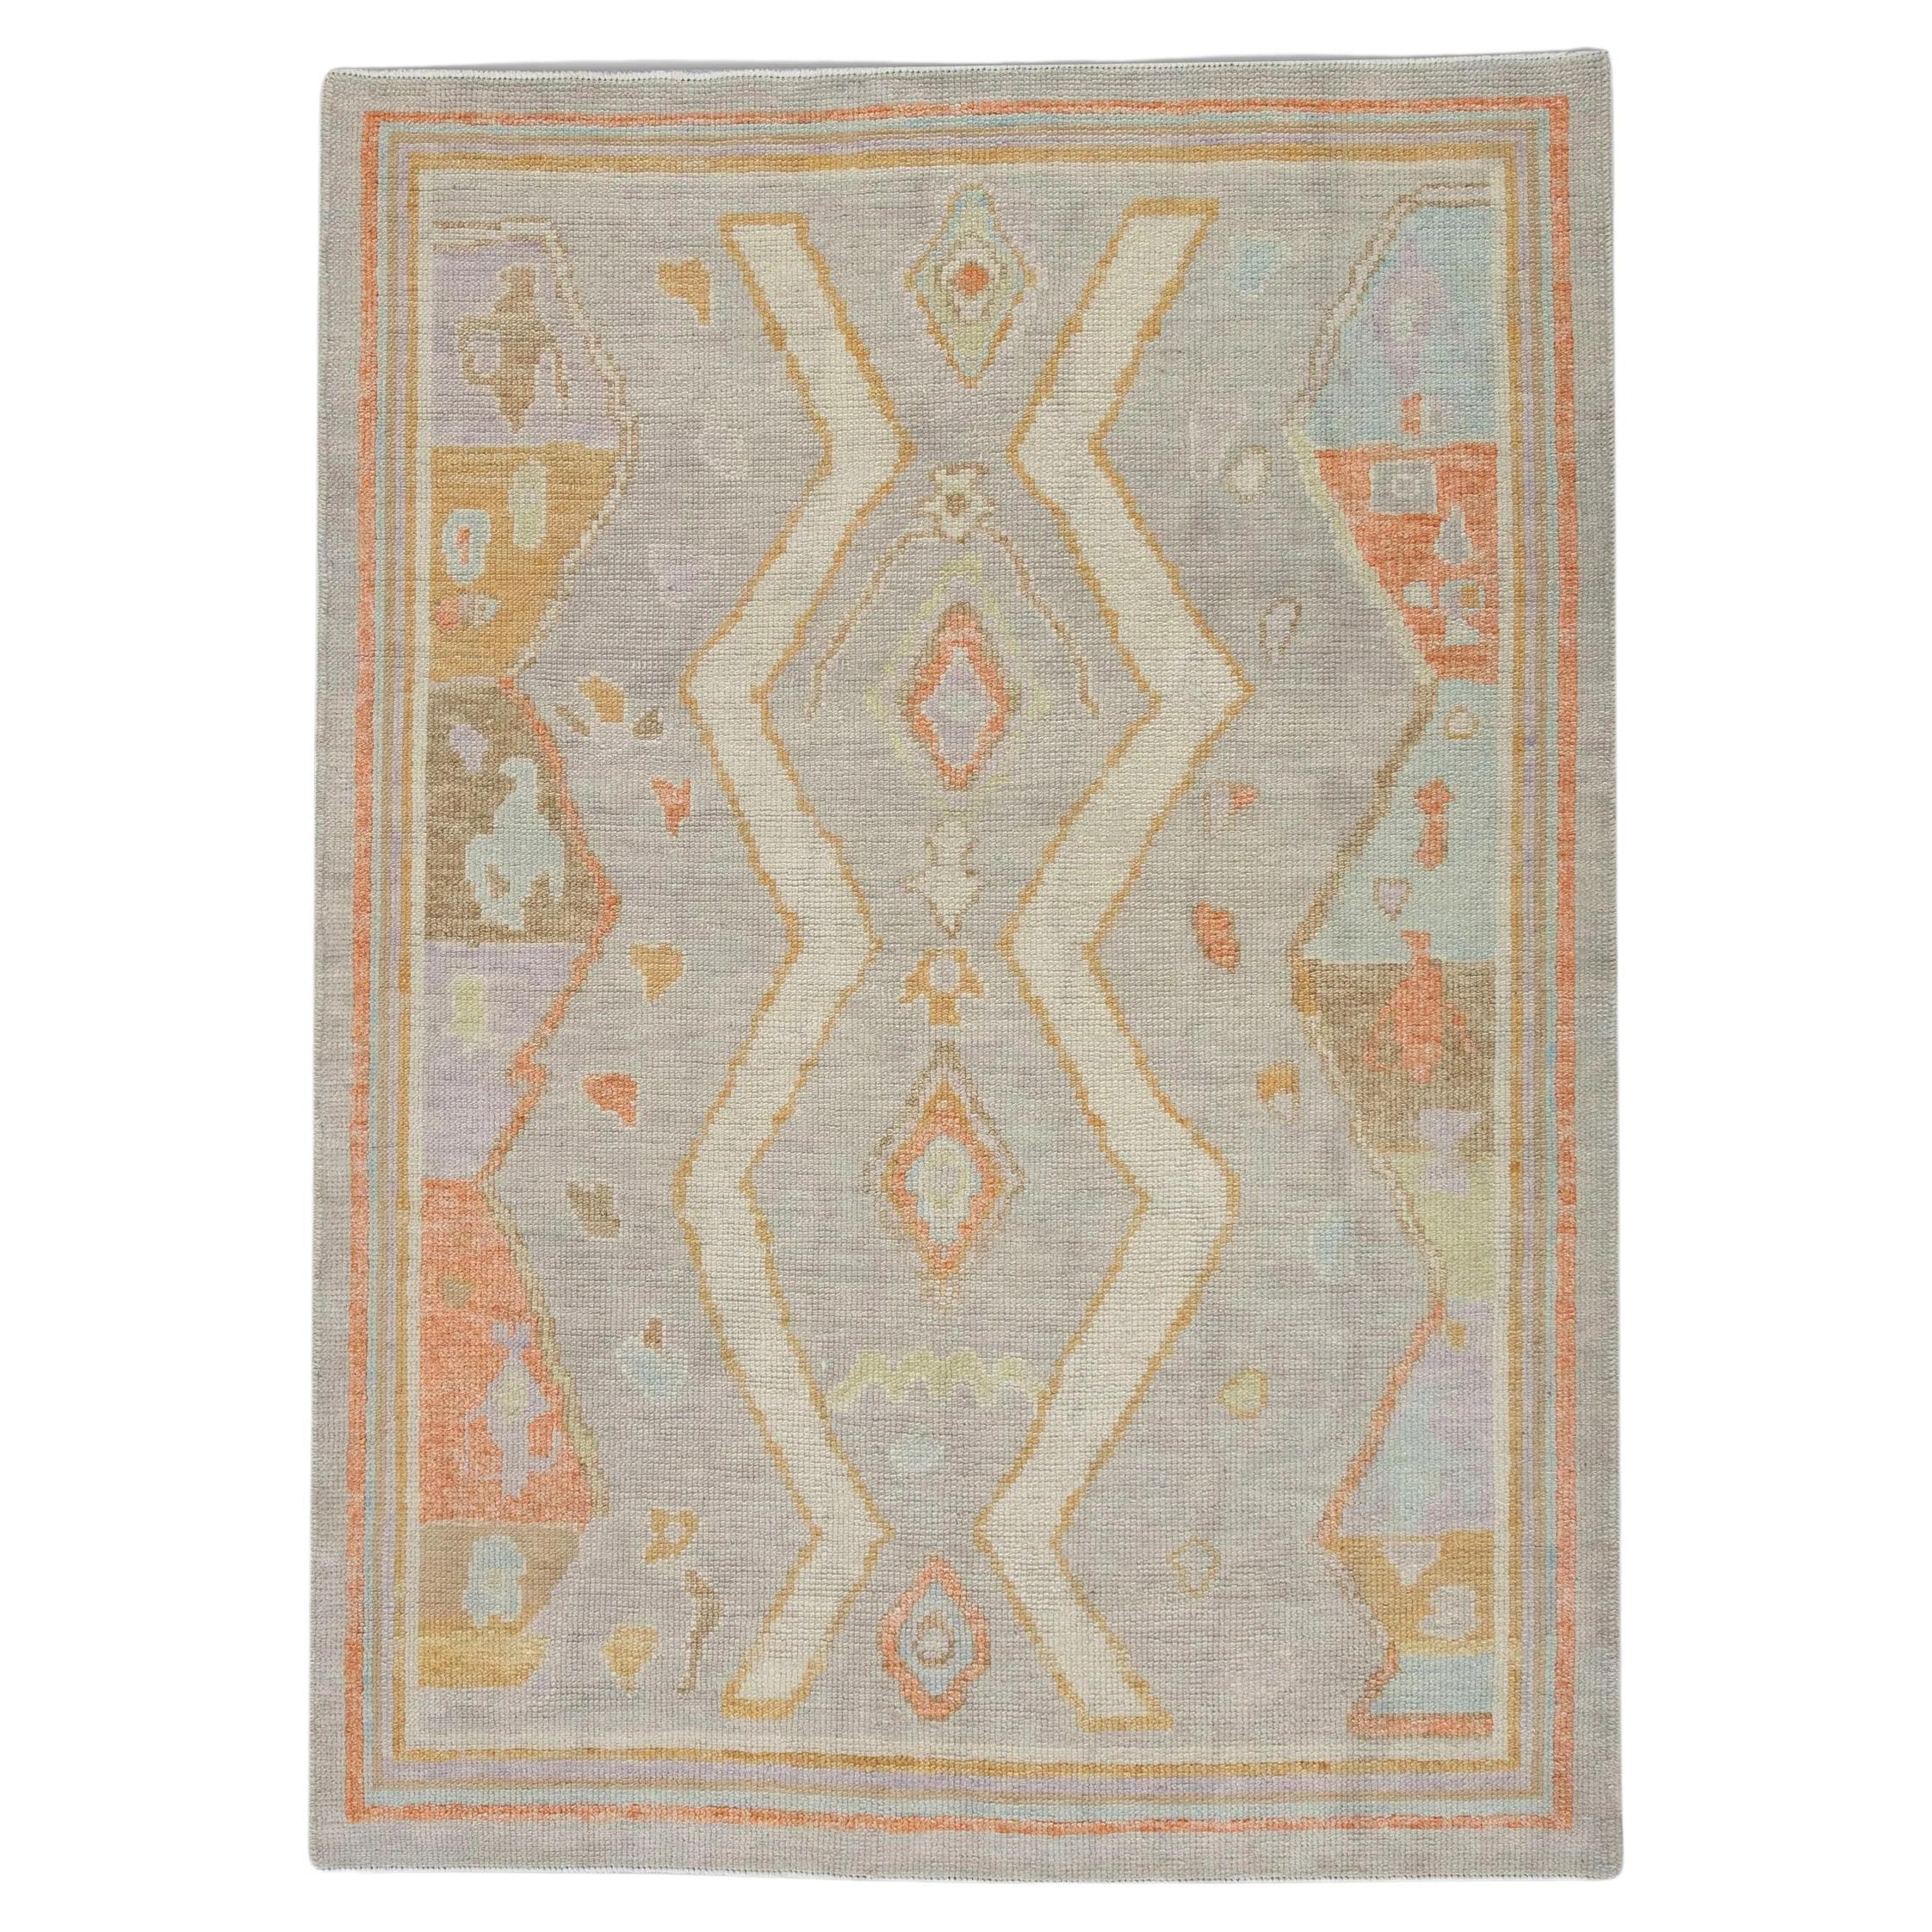 Handwoven Wool Turkish Oushak Rug with Pastel Blue Geometric Design 4'1" x 5'7" For Sale